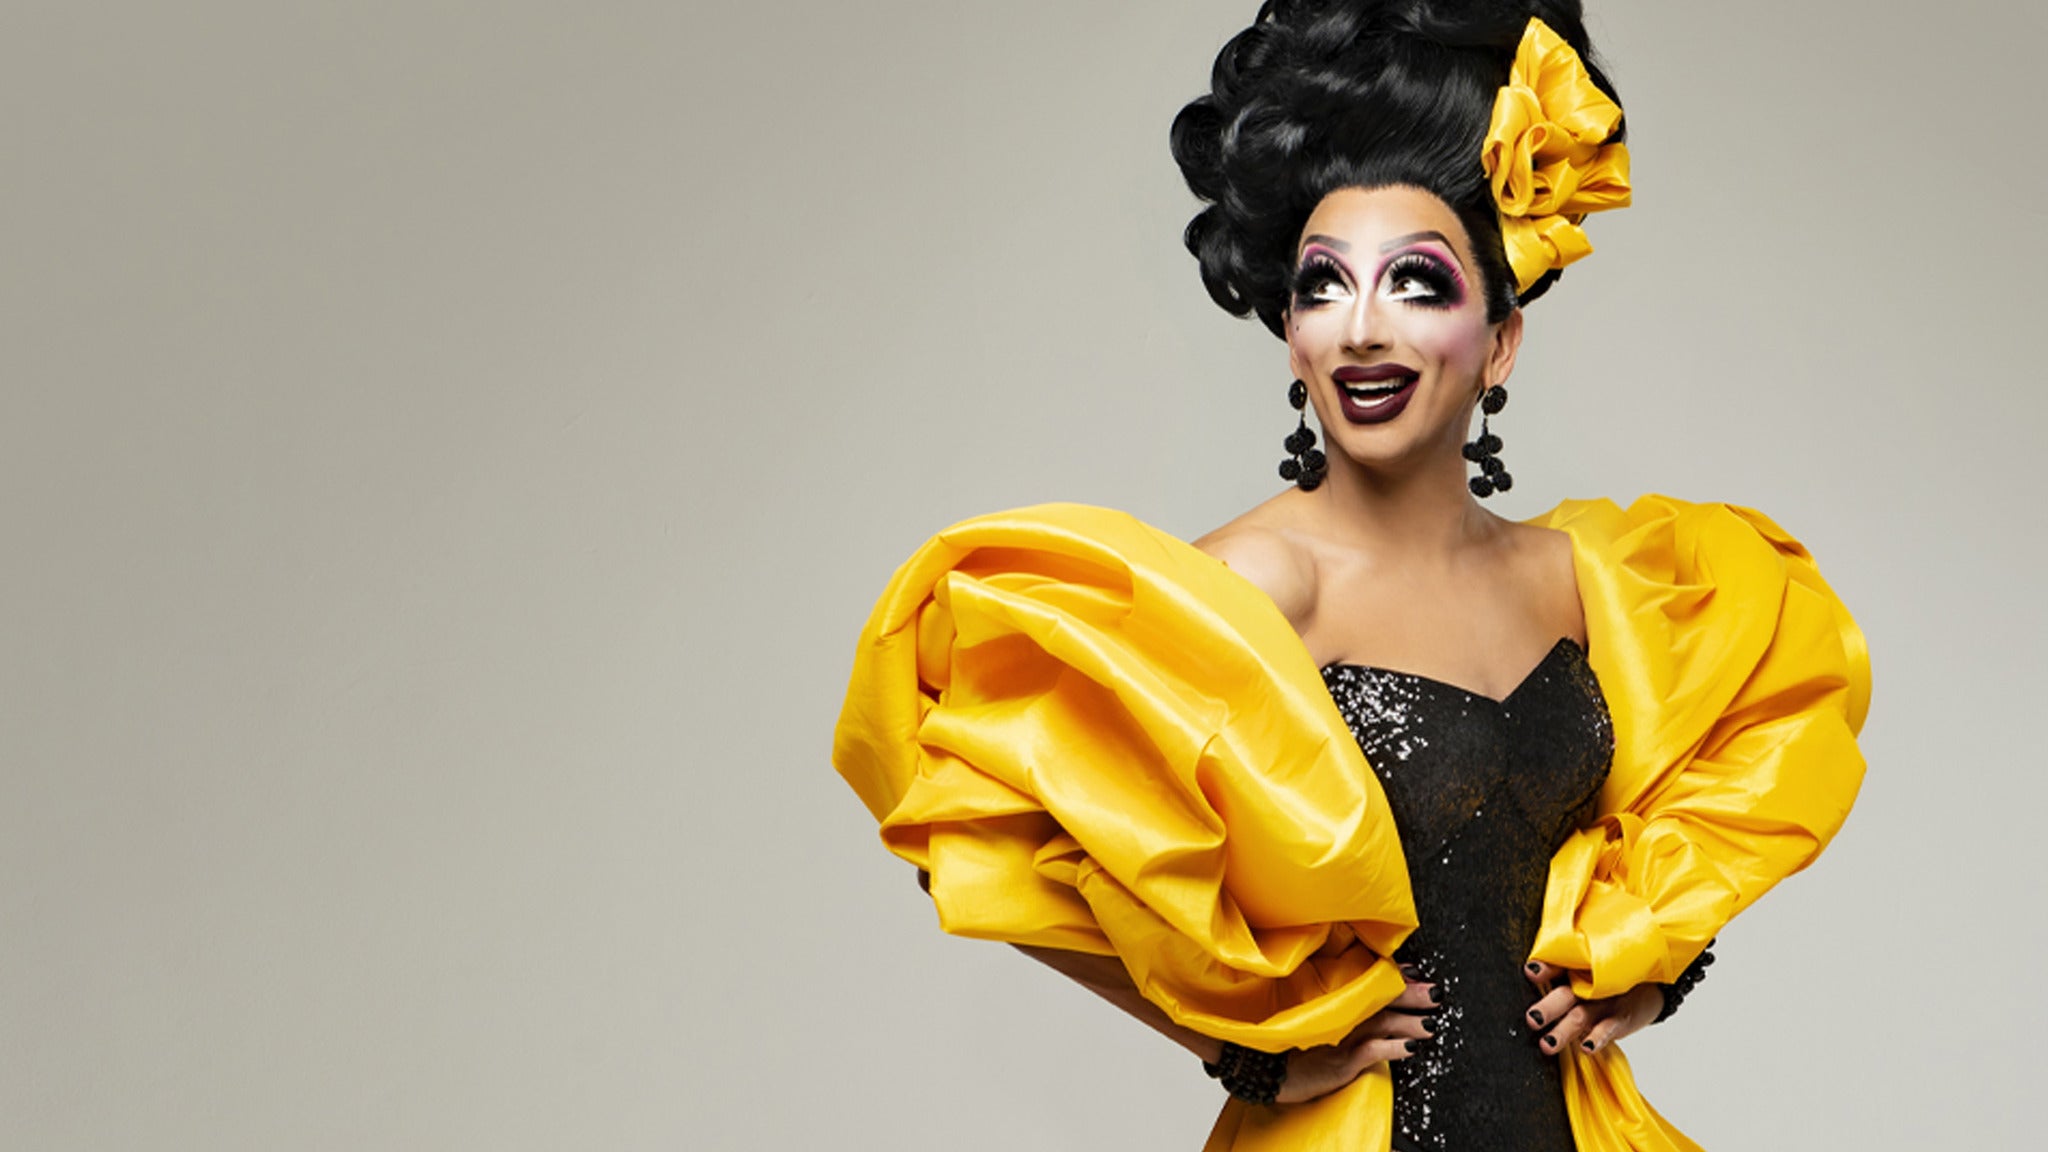 Image used with permission from Ticketmaster | Bianca Del Rio tickets